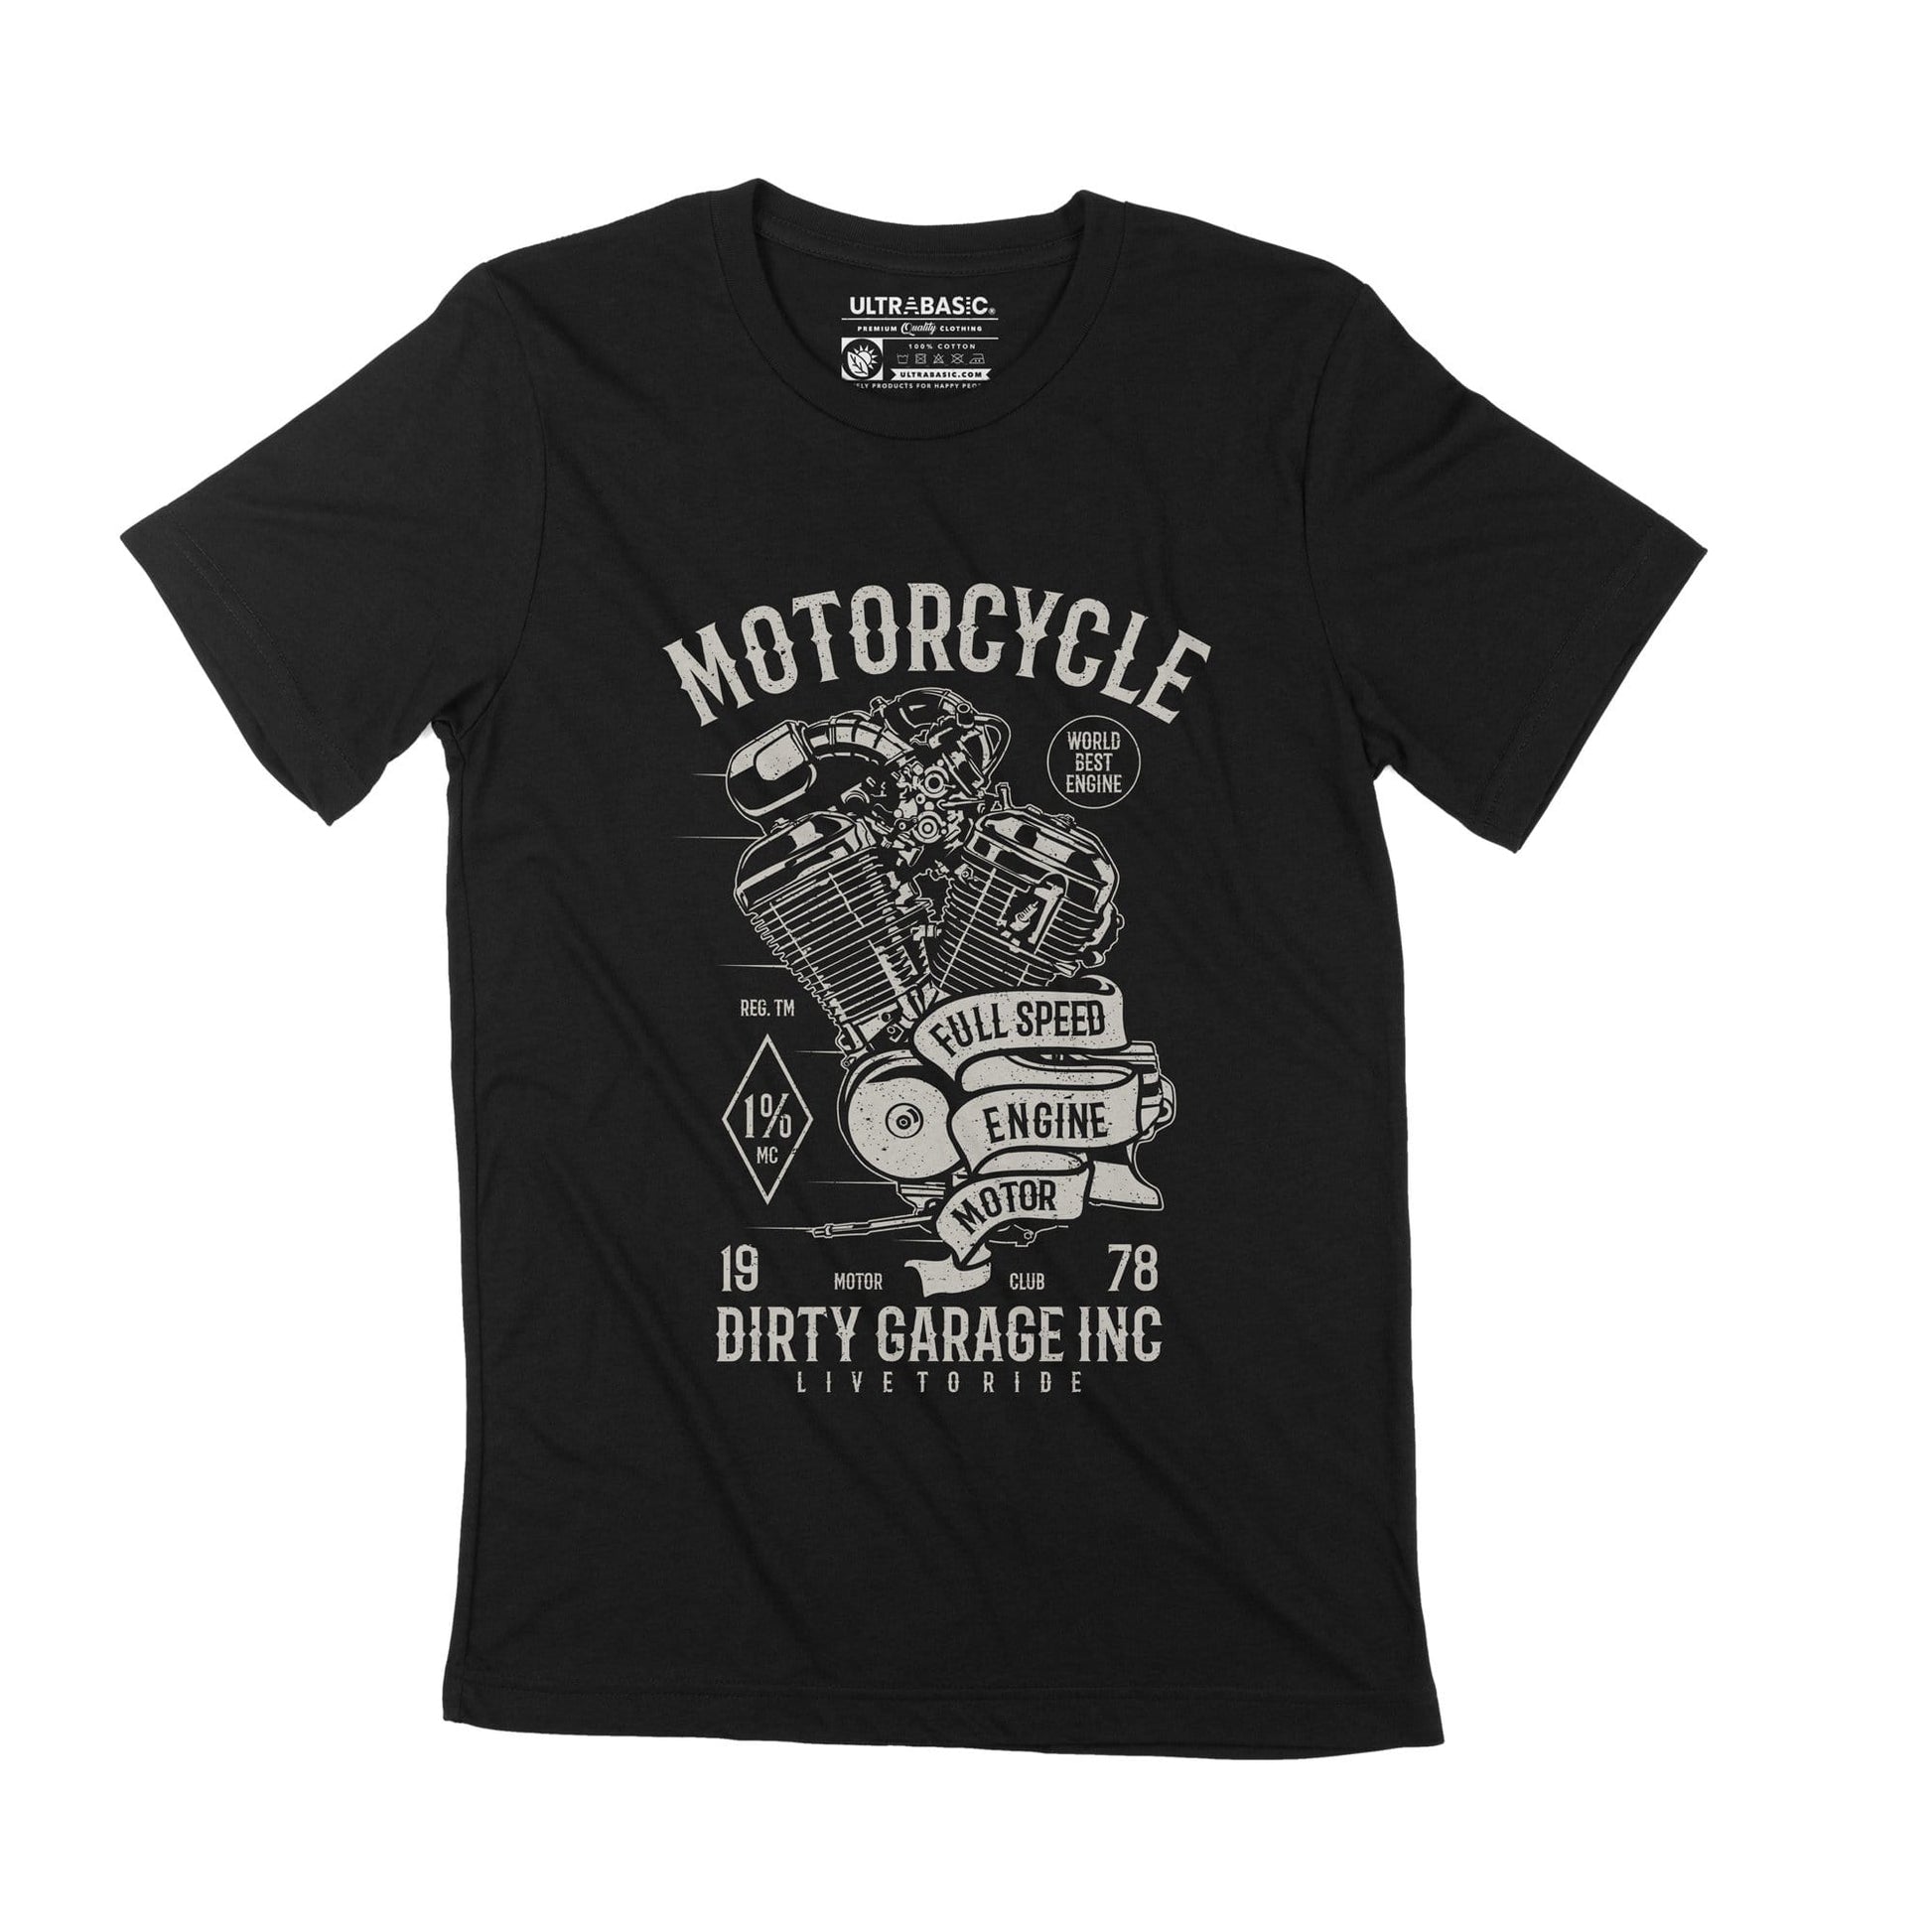 ULTRABASIC Vintage Motorcycle 1978 Men's T-Shirt - Dirty Garage Inc Graphic Tee world best engine motor club clothing men outdoor mechanic victory outfits usa guy apparel road live simply tees unisex tshirts rock genuine live motorbike cafe racer indian motorcycles dad bikers patches fast driving casual merchandise 